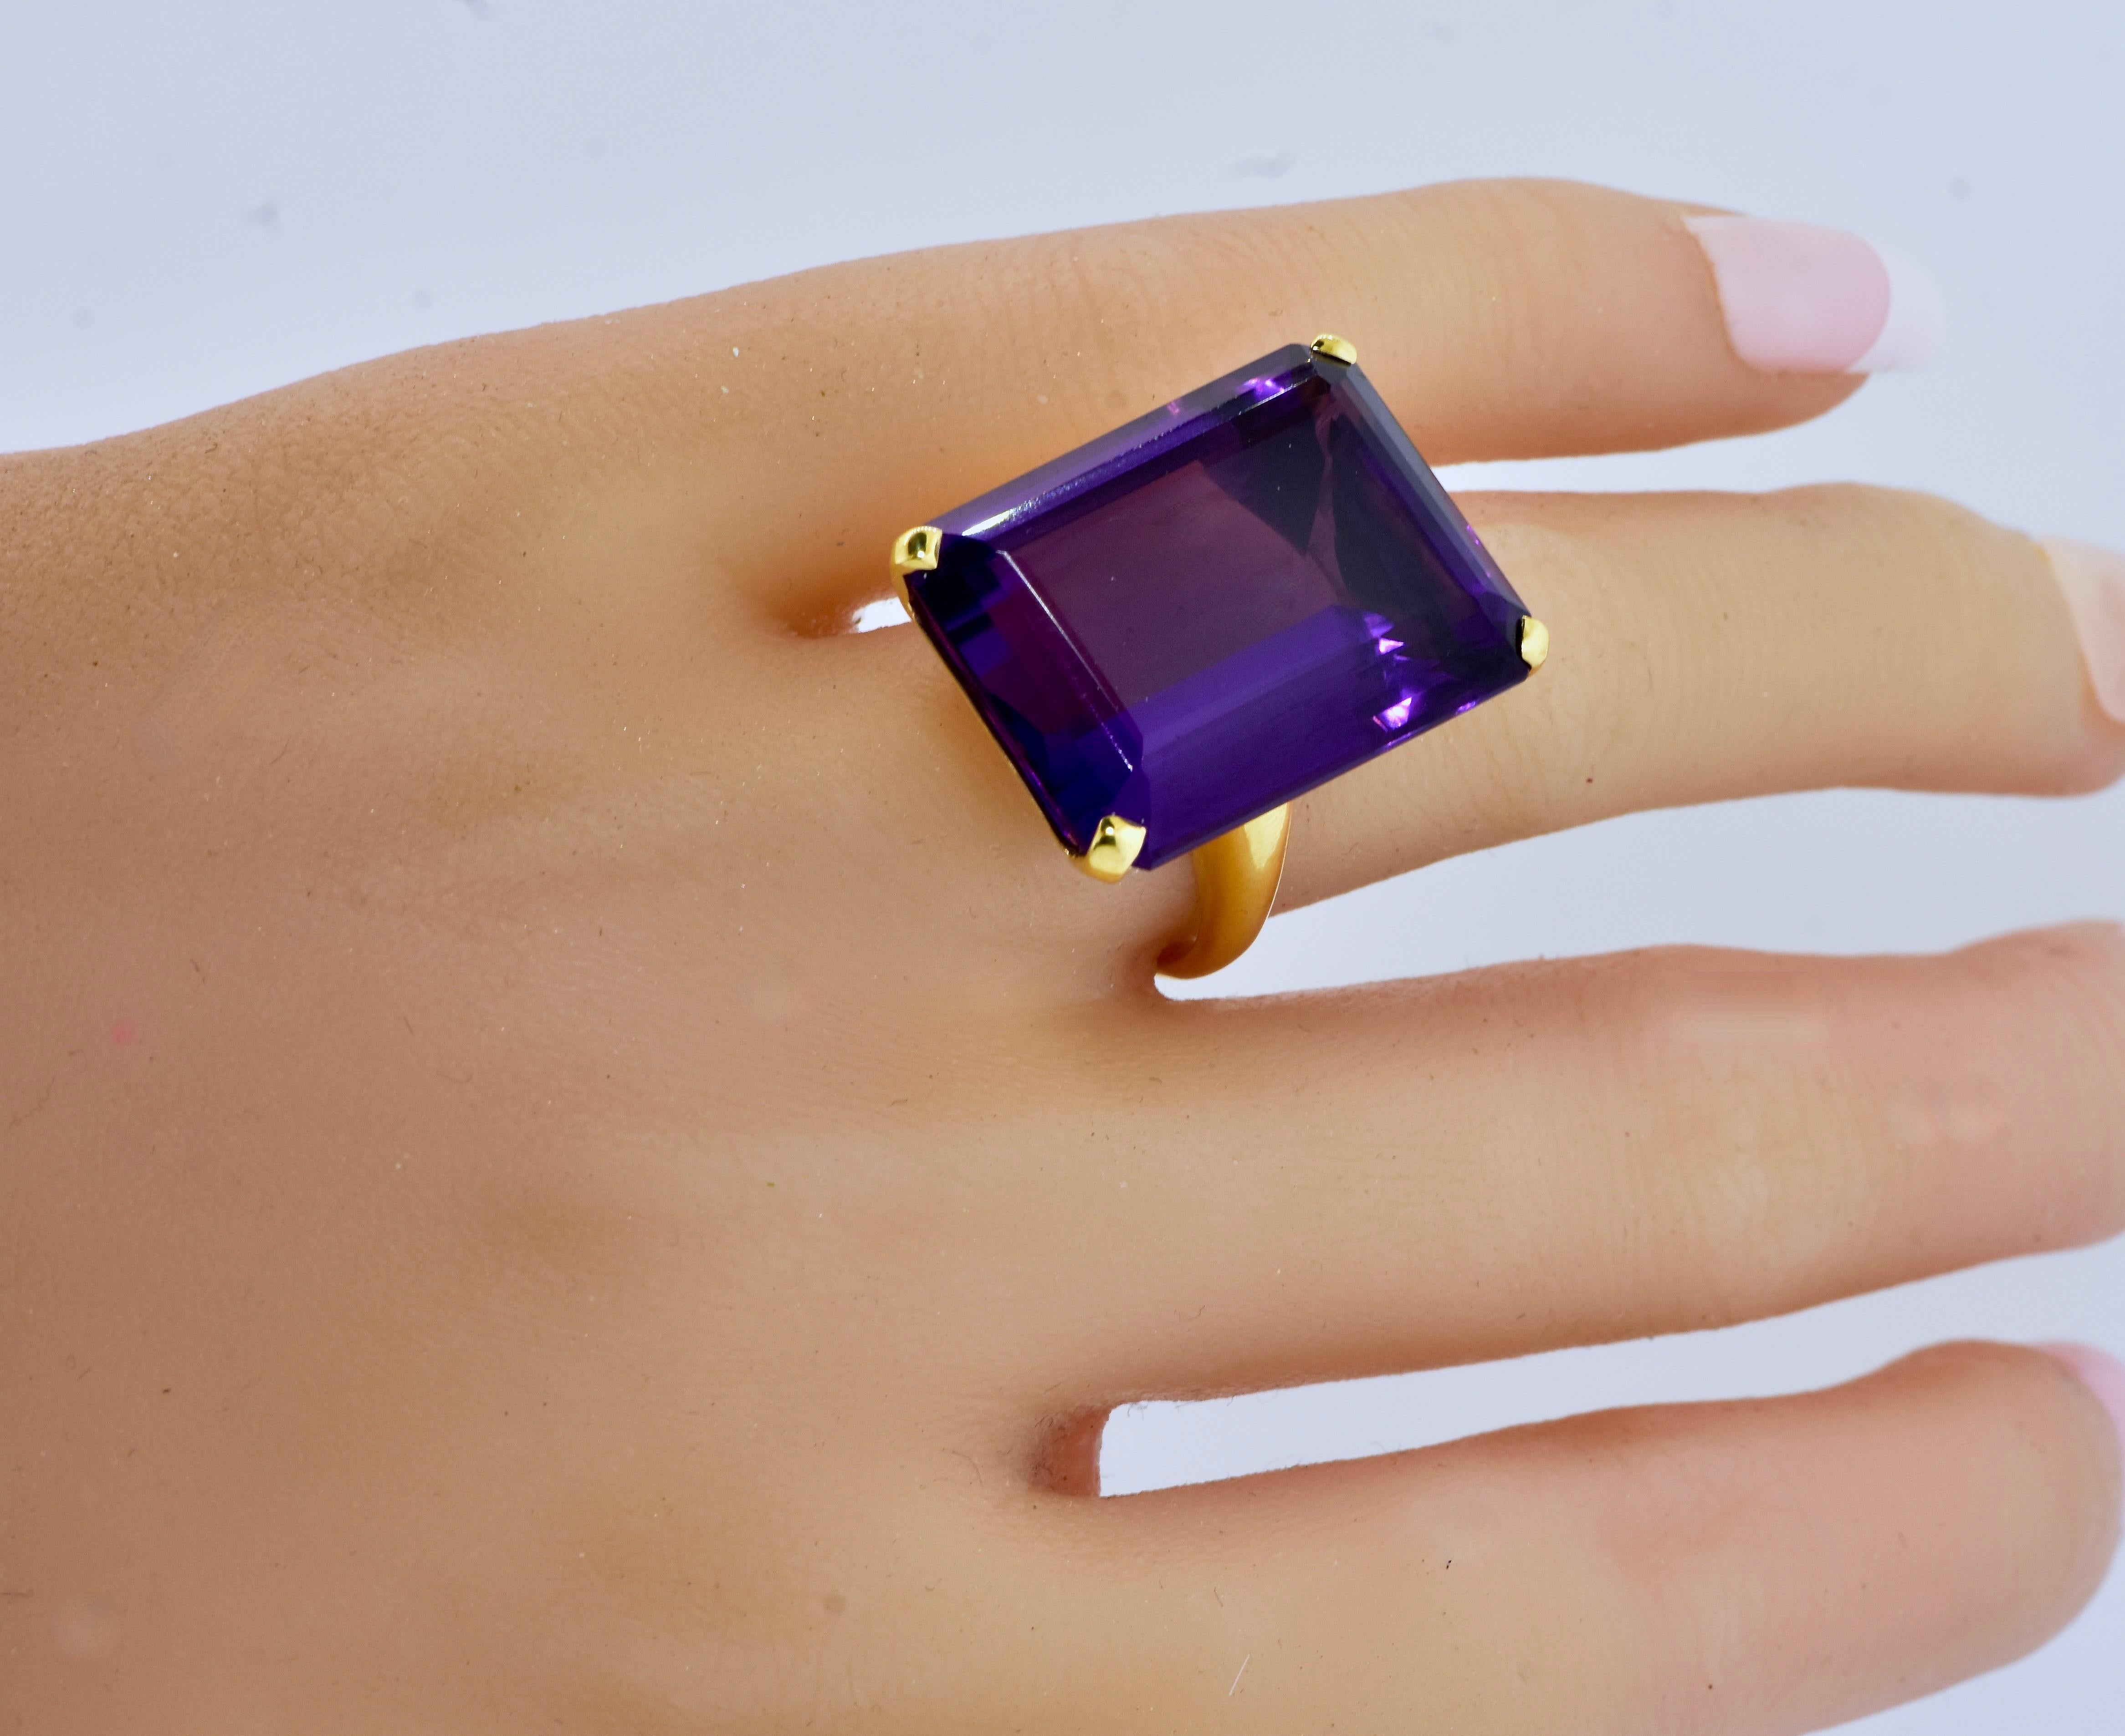 Very fine large emerald cut amethyst displaying a vivid deep purple with flashes of red, this new ring is hand crafted in 18K yellow gold by Pierre/Famille of Aspen, CO.  

The long emerald cut amethyst weighs 36.21 cts.  It is a size 6.5 and can be